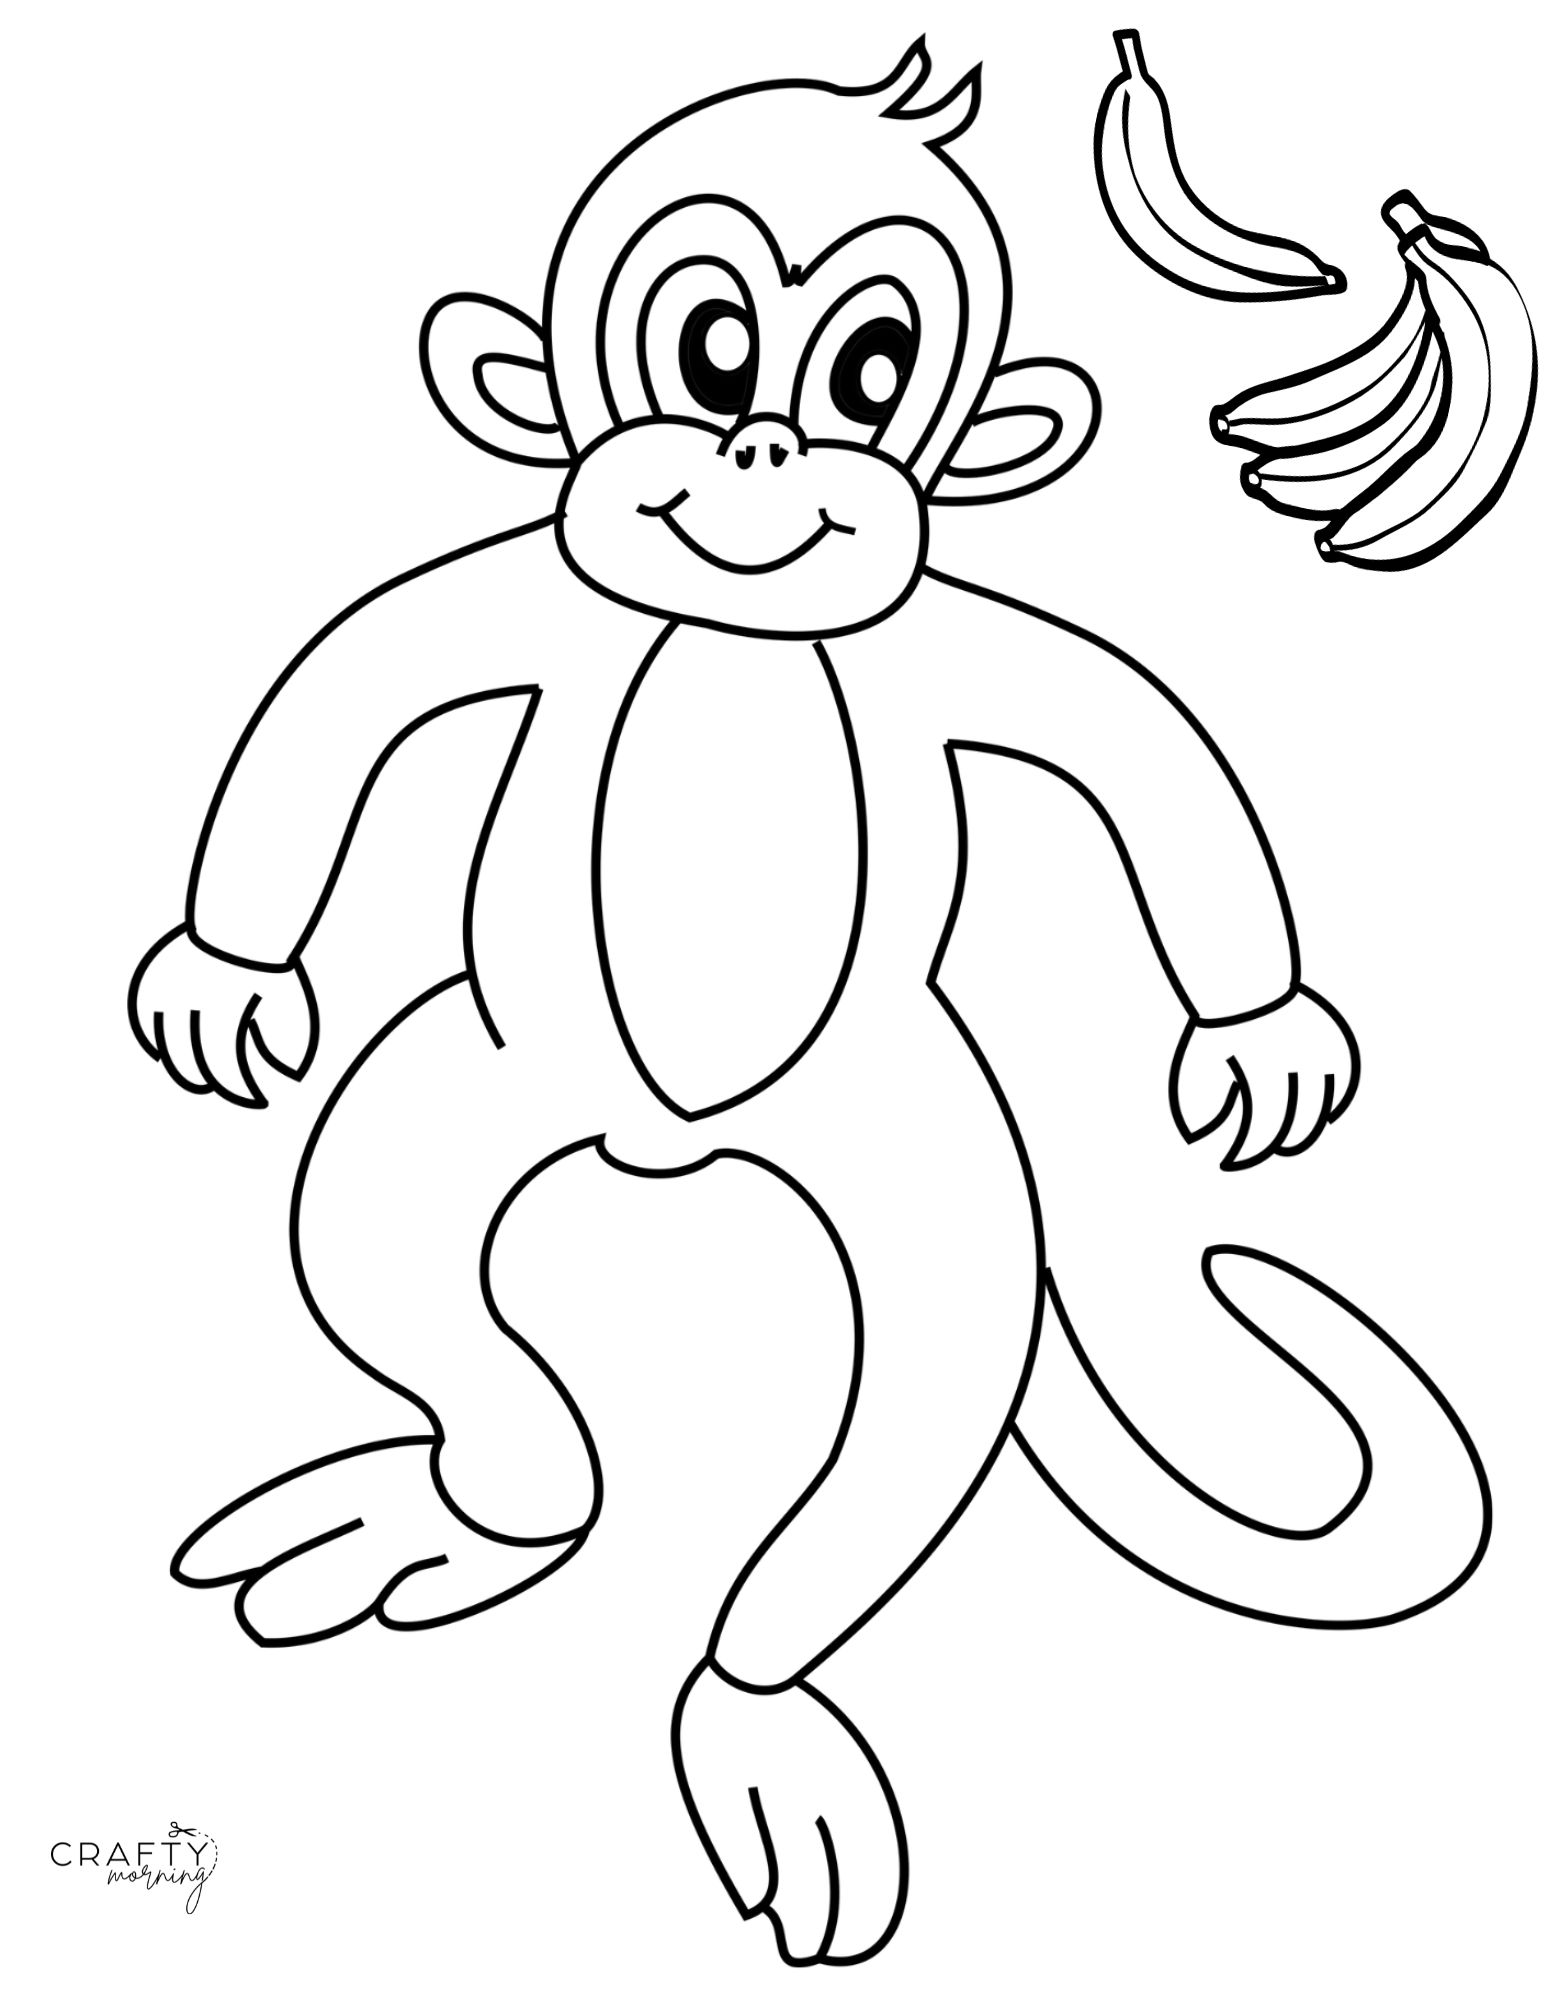 Monkey step by step drawing for kids – Indian hindu baby